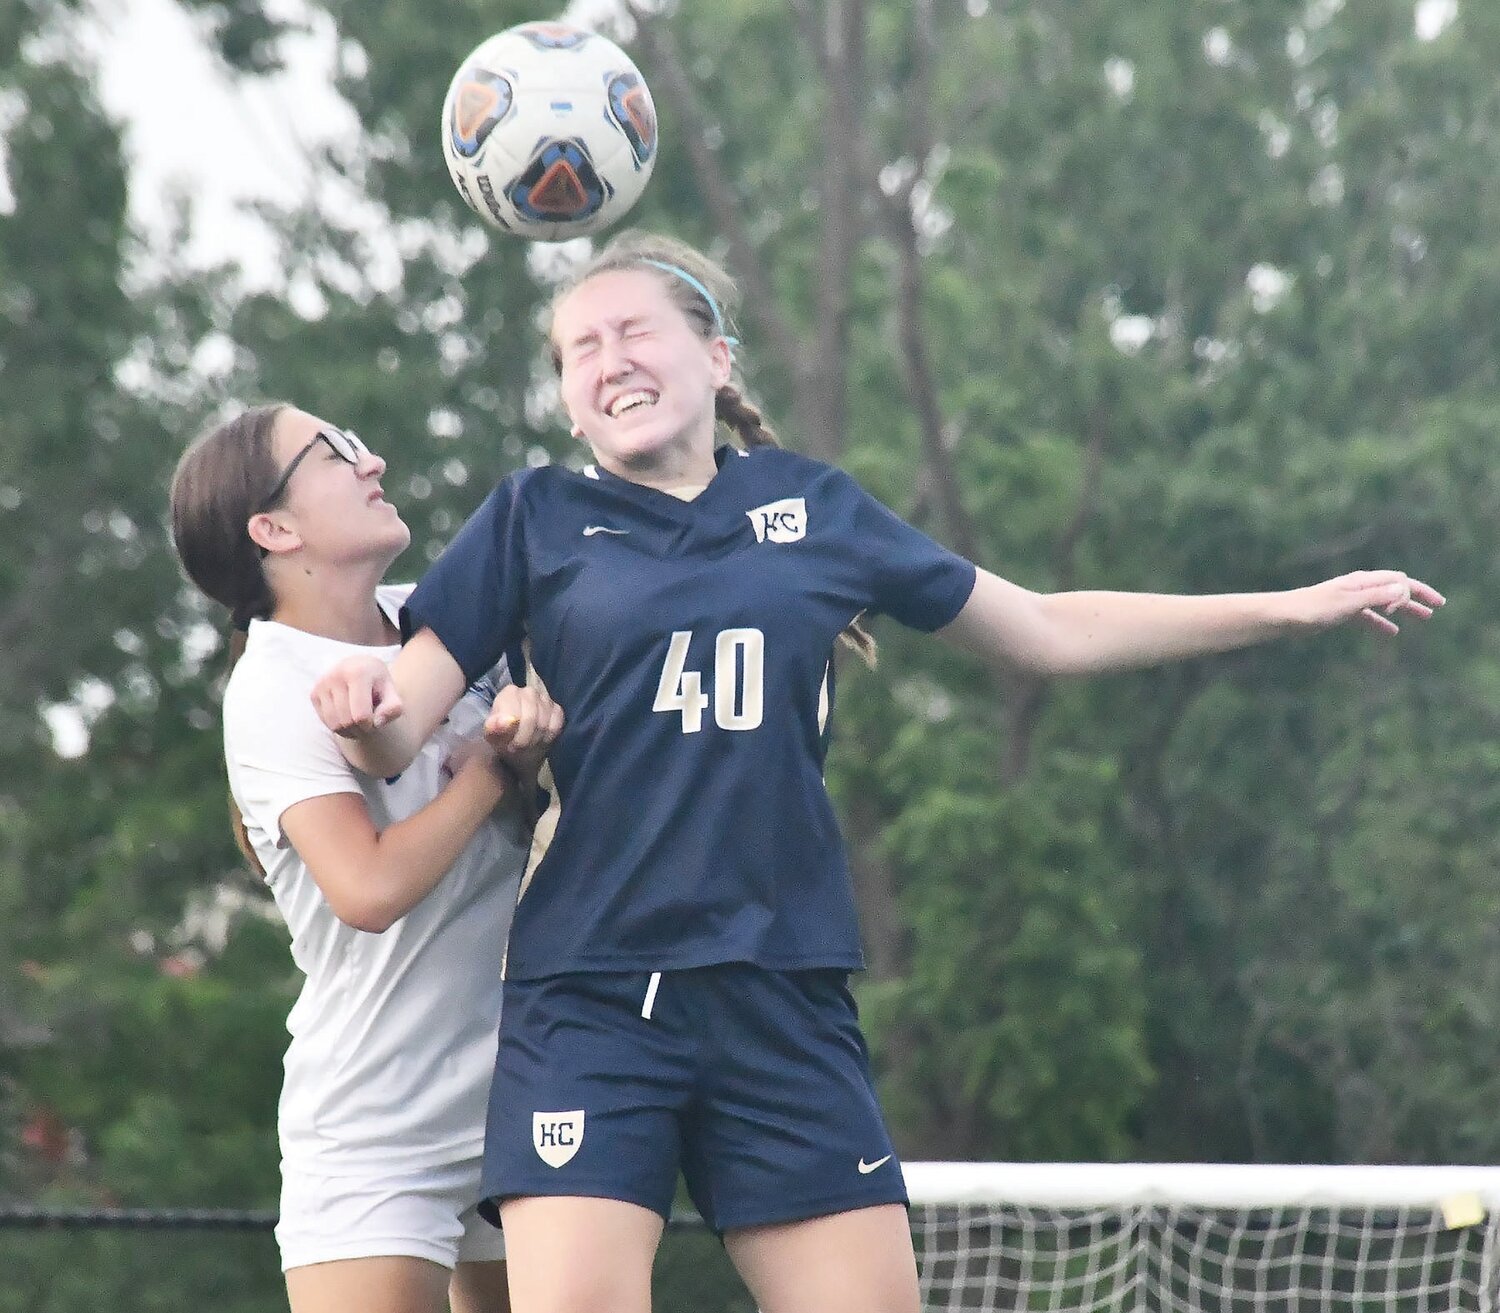 Moberly's Hadley Cleavinger (left) vies for the ball versus Helias Catholic's Brooke Yanskey. The Crusaders whitewashed the Spartans, 7-0.